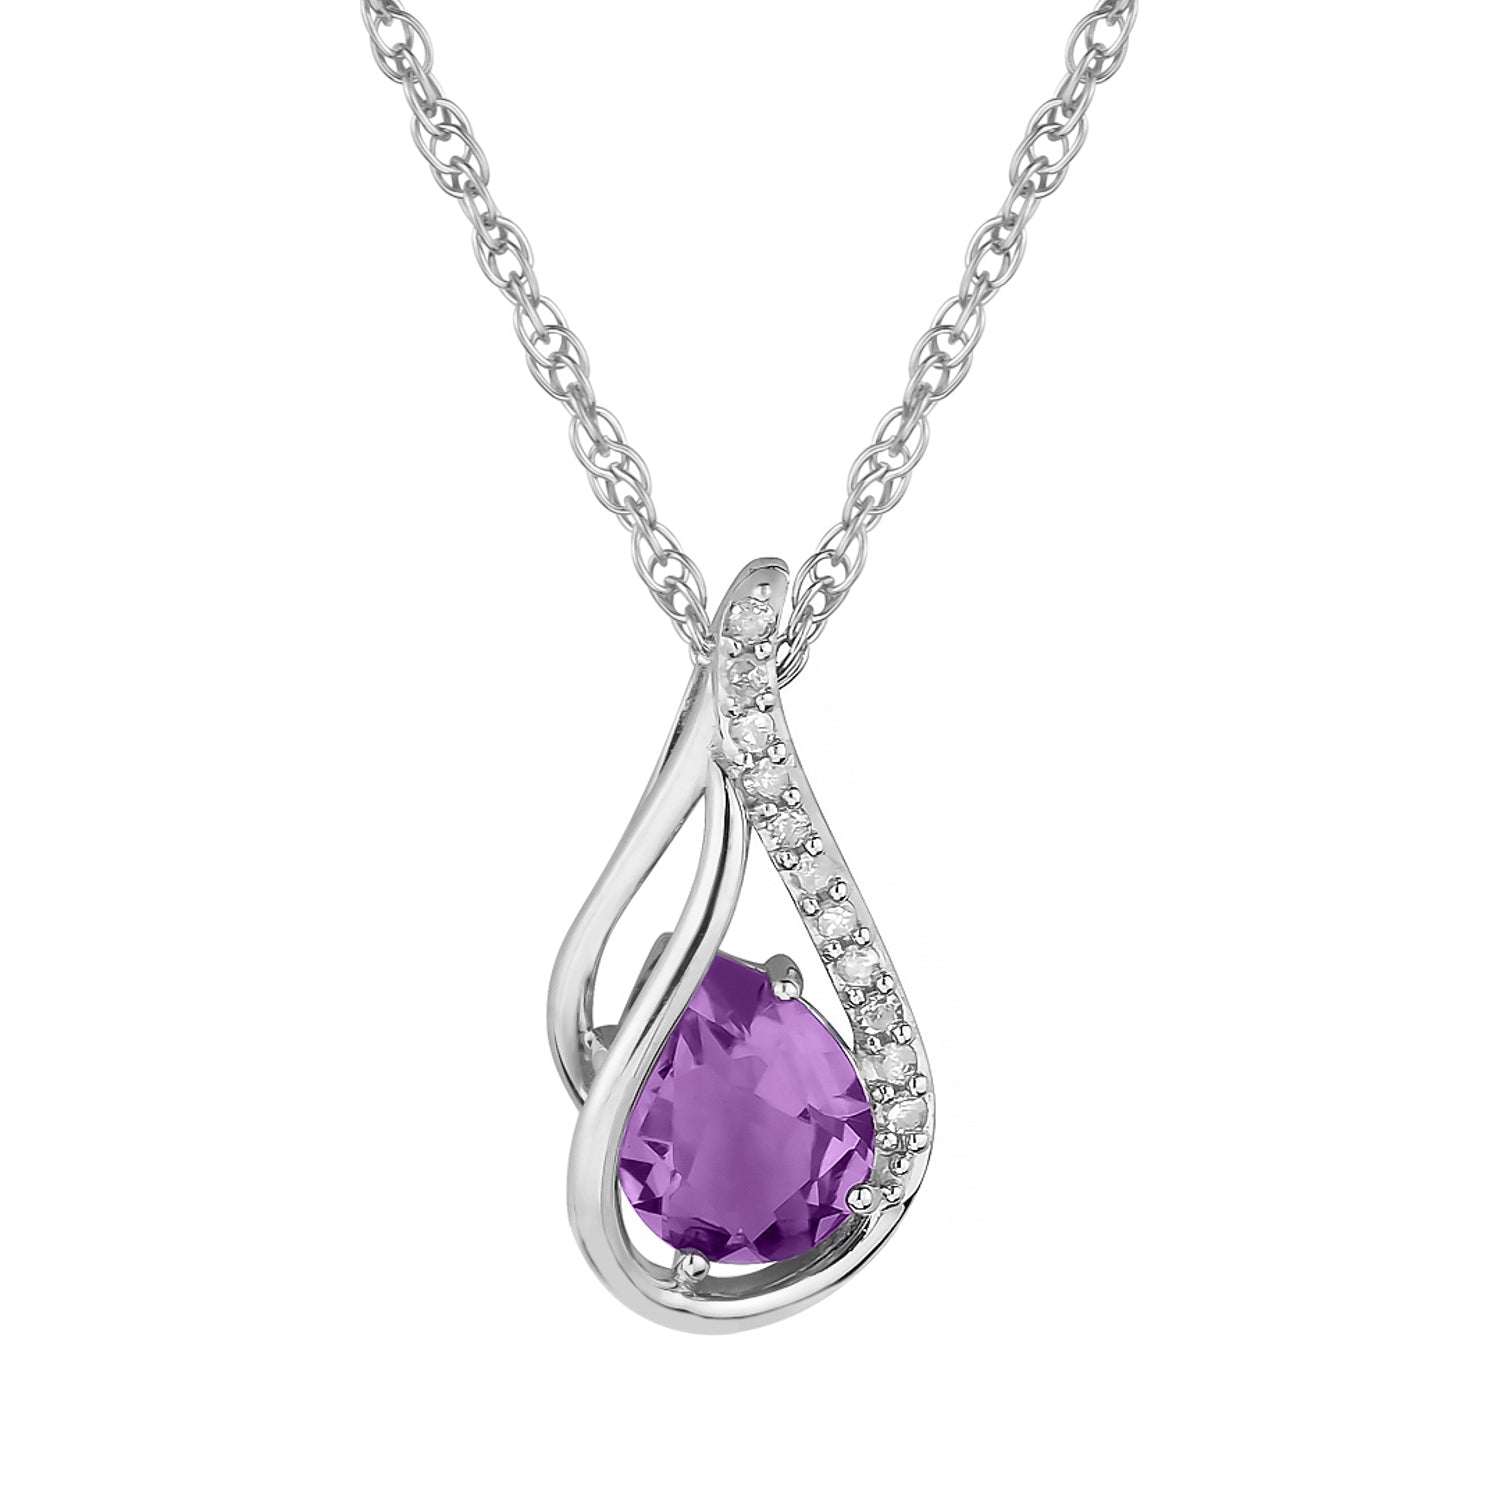 10k White Gold Genuine Pear shape Amethyst and Diamond Halo Drop Pendant Necklace